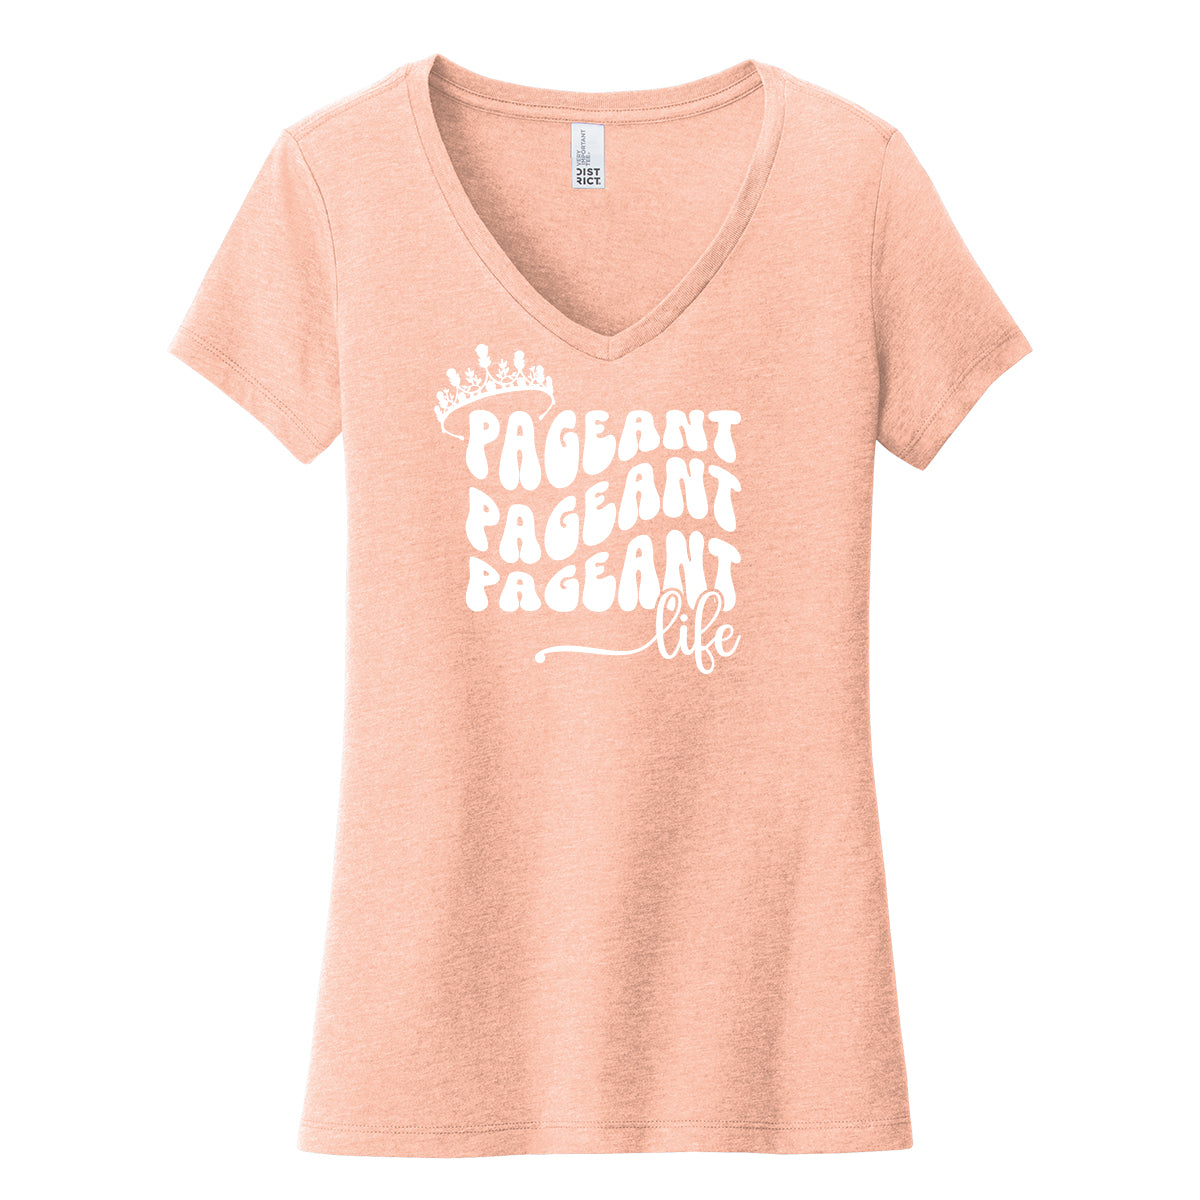 Pageant Life V-Neck Tee